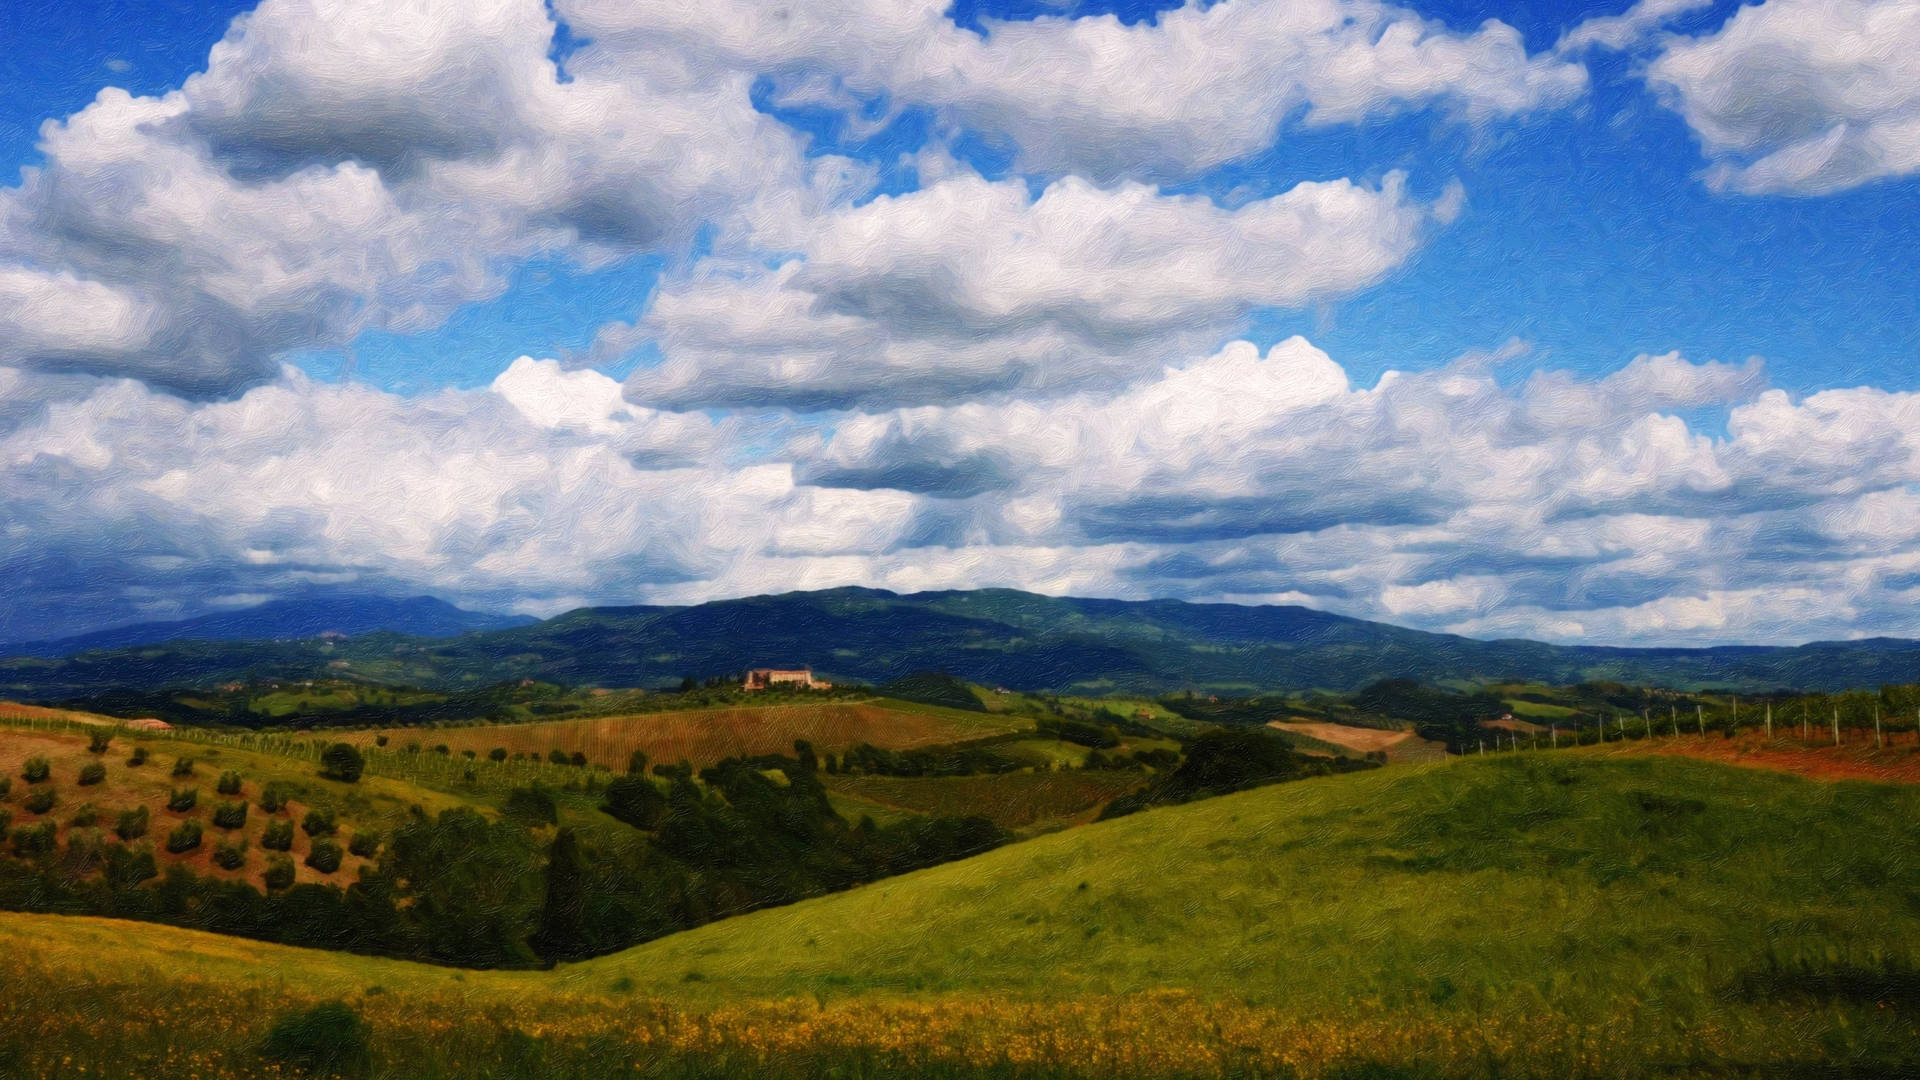 Cloudy Day In Tuscany Italy Wallpaper